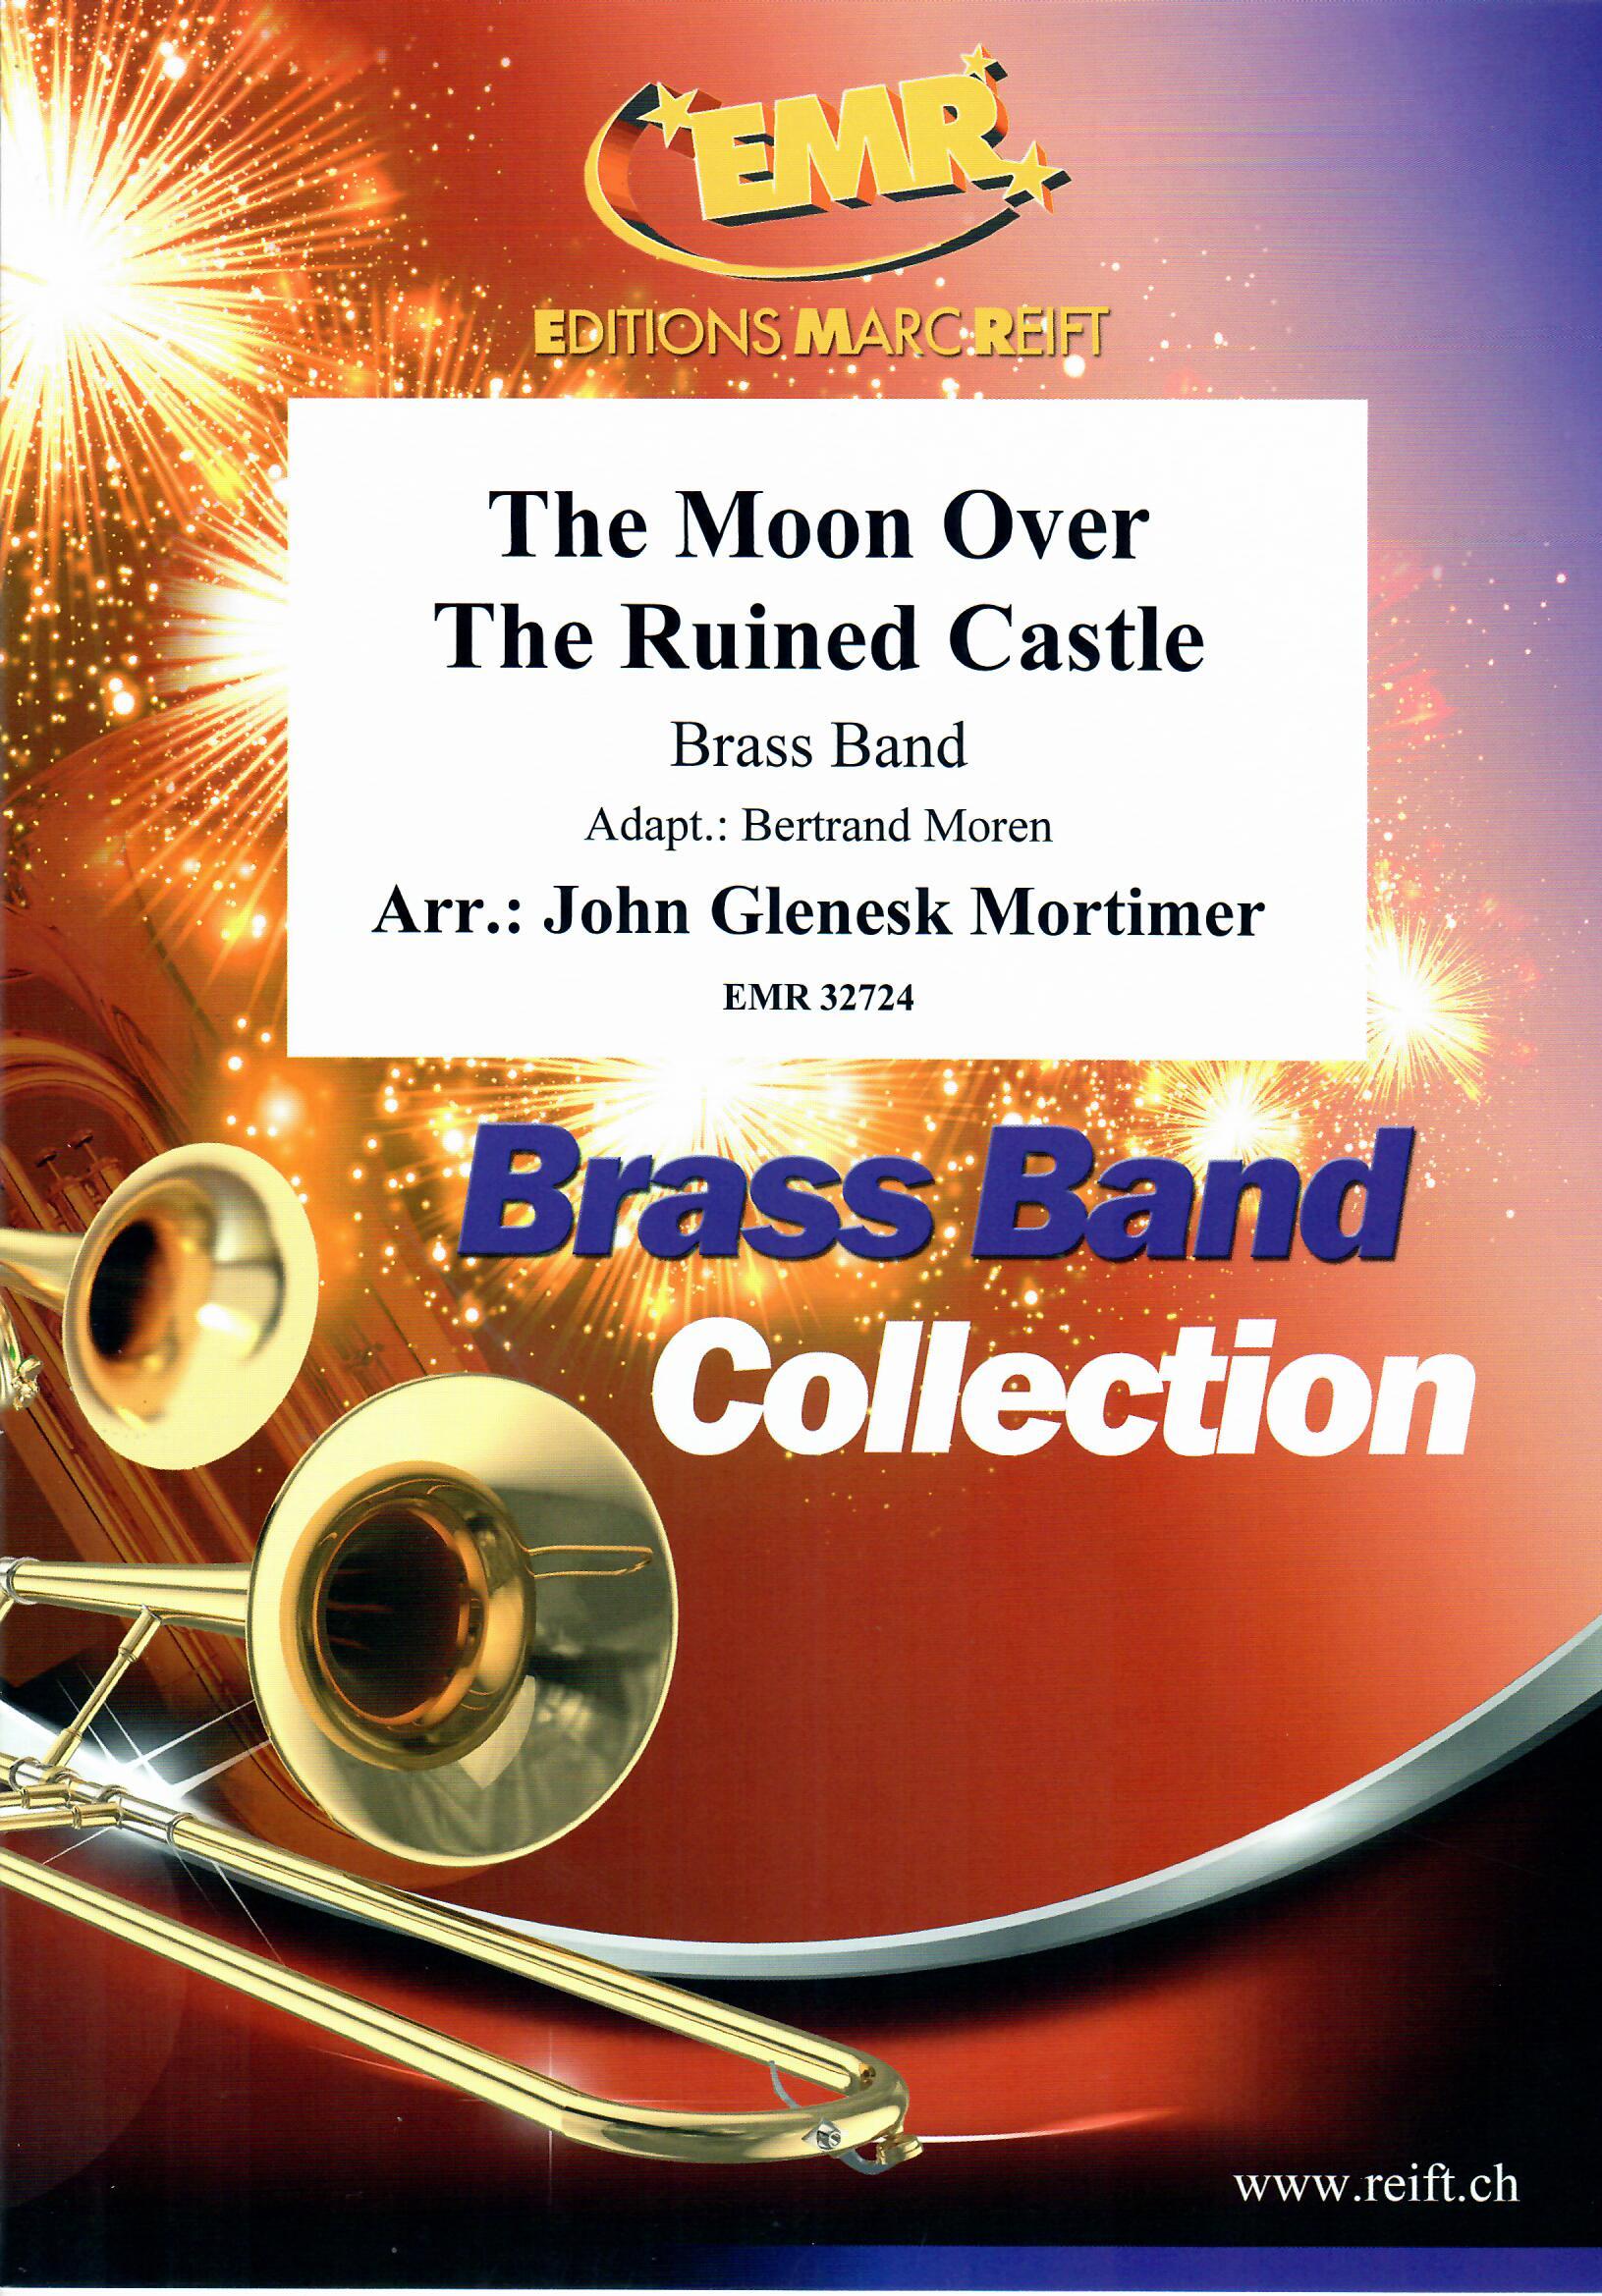 THE MOON OVER THE RUINED CASTLE - KOJO NO TSUKI, NEW & RECENT Publications, LIGHT CONCERT MUSIC